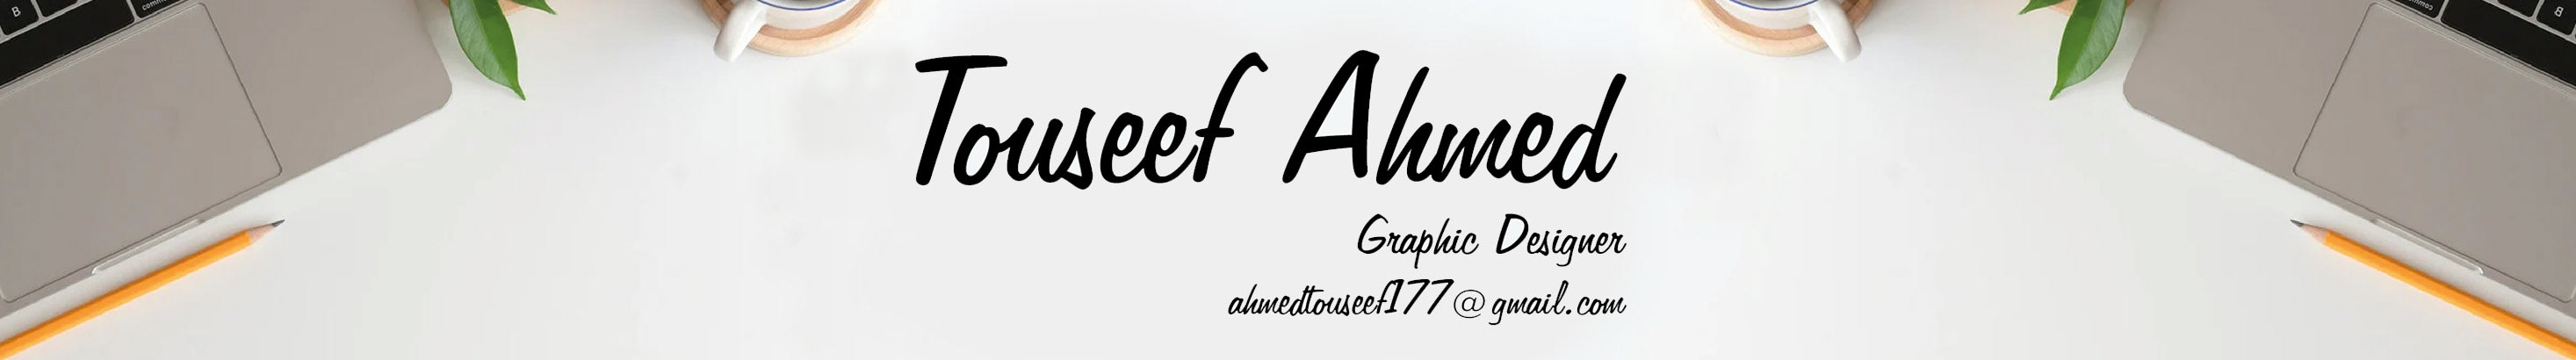 Touseef Ahmed's profile banner